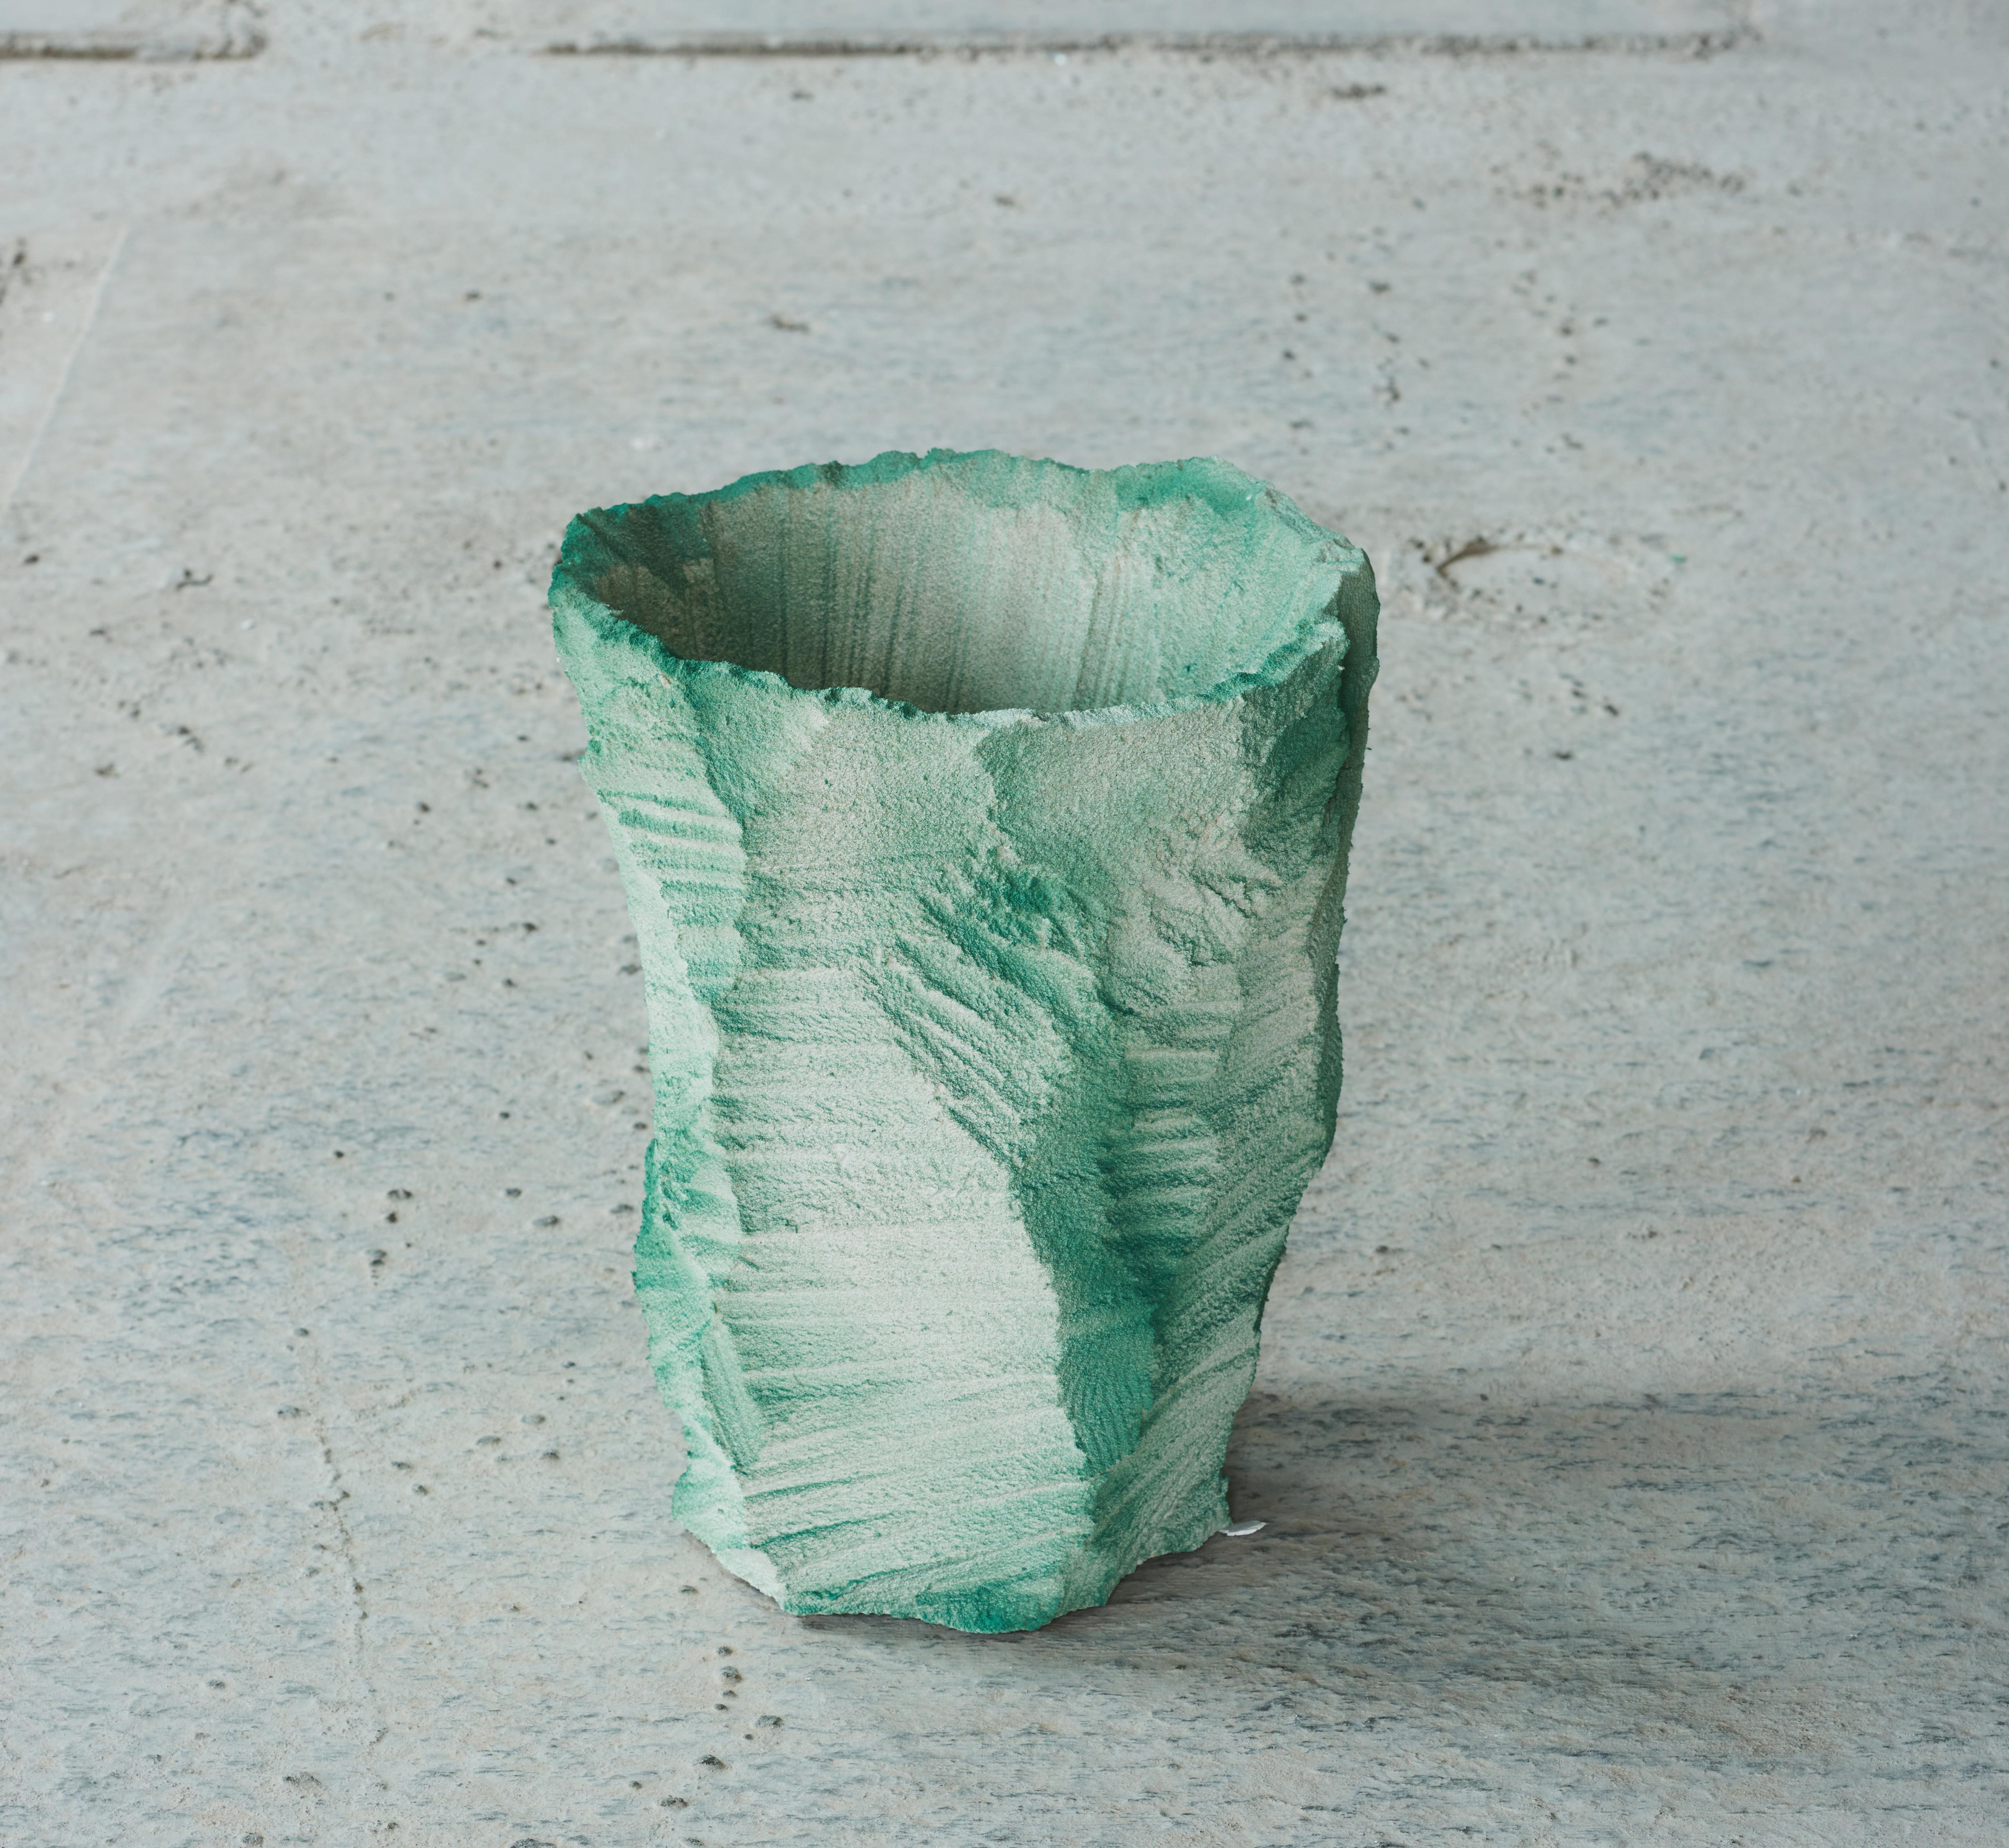 One-off a kind - Contemporary Design Moss - Vase by Andredottir & Bobek
Artificial Nature is a collaboration between the artist and design duo Josephine Andredottir and Emilie Bobek

They have in this collection imitated landscape with artificial